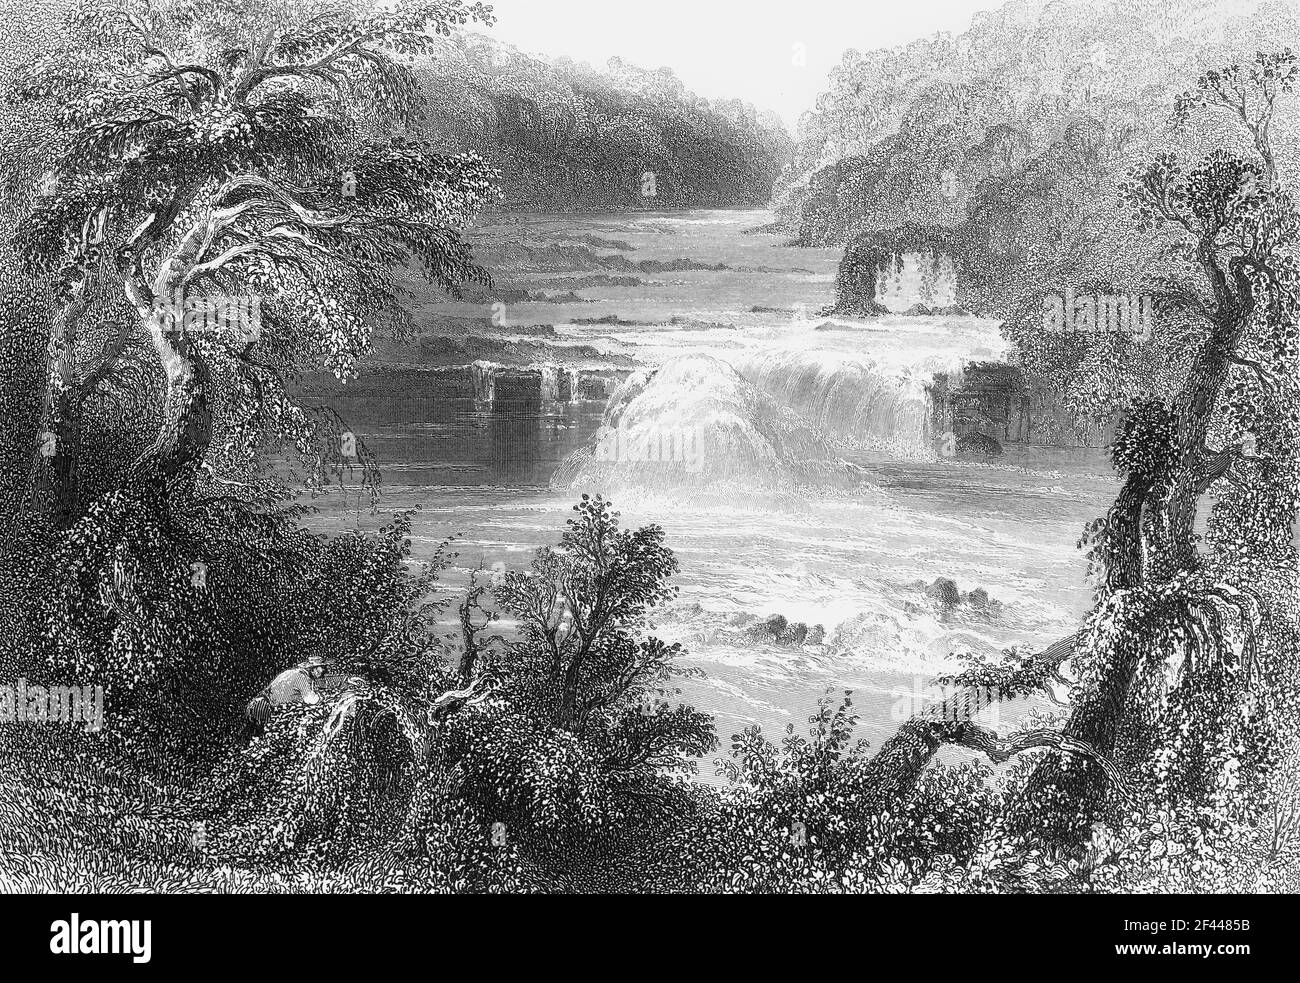 19th Century steel engraving by W H Bartlett  of the Salmon Leap, a stretch of the Rover Liffey where the river cascades over rocky ledges just above the town of Leixlip, County Kildare, Ireland. Stock Photo